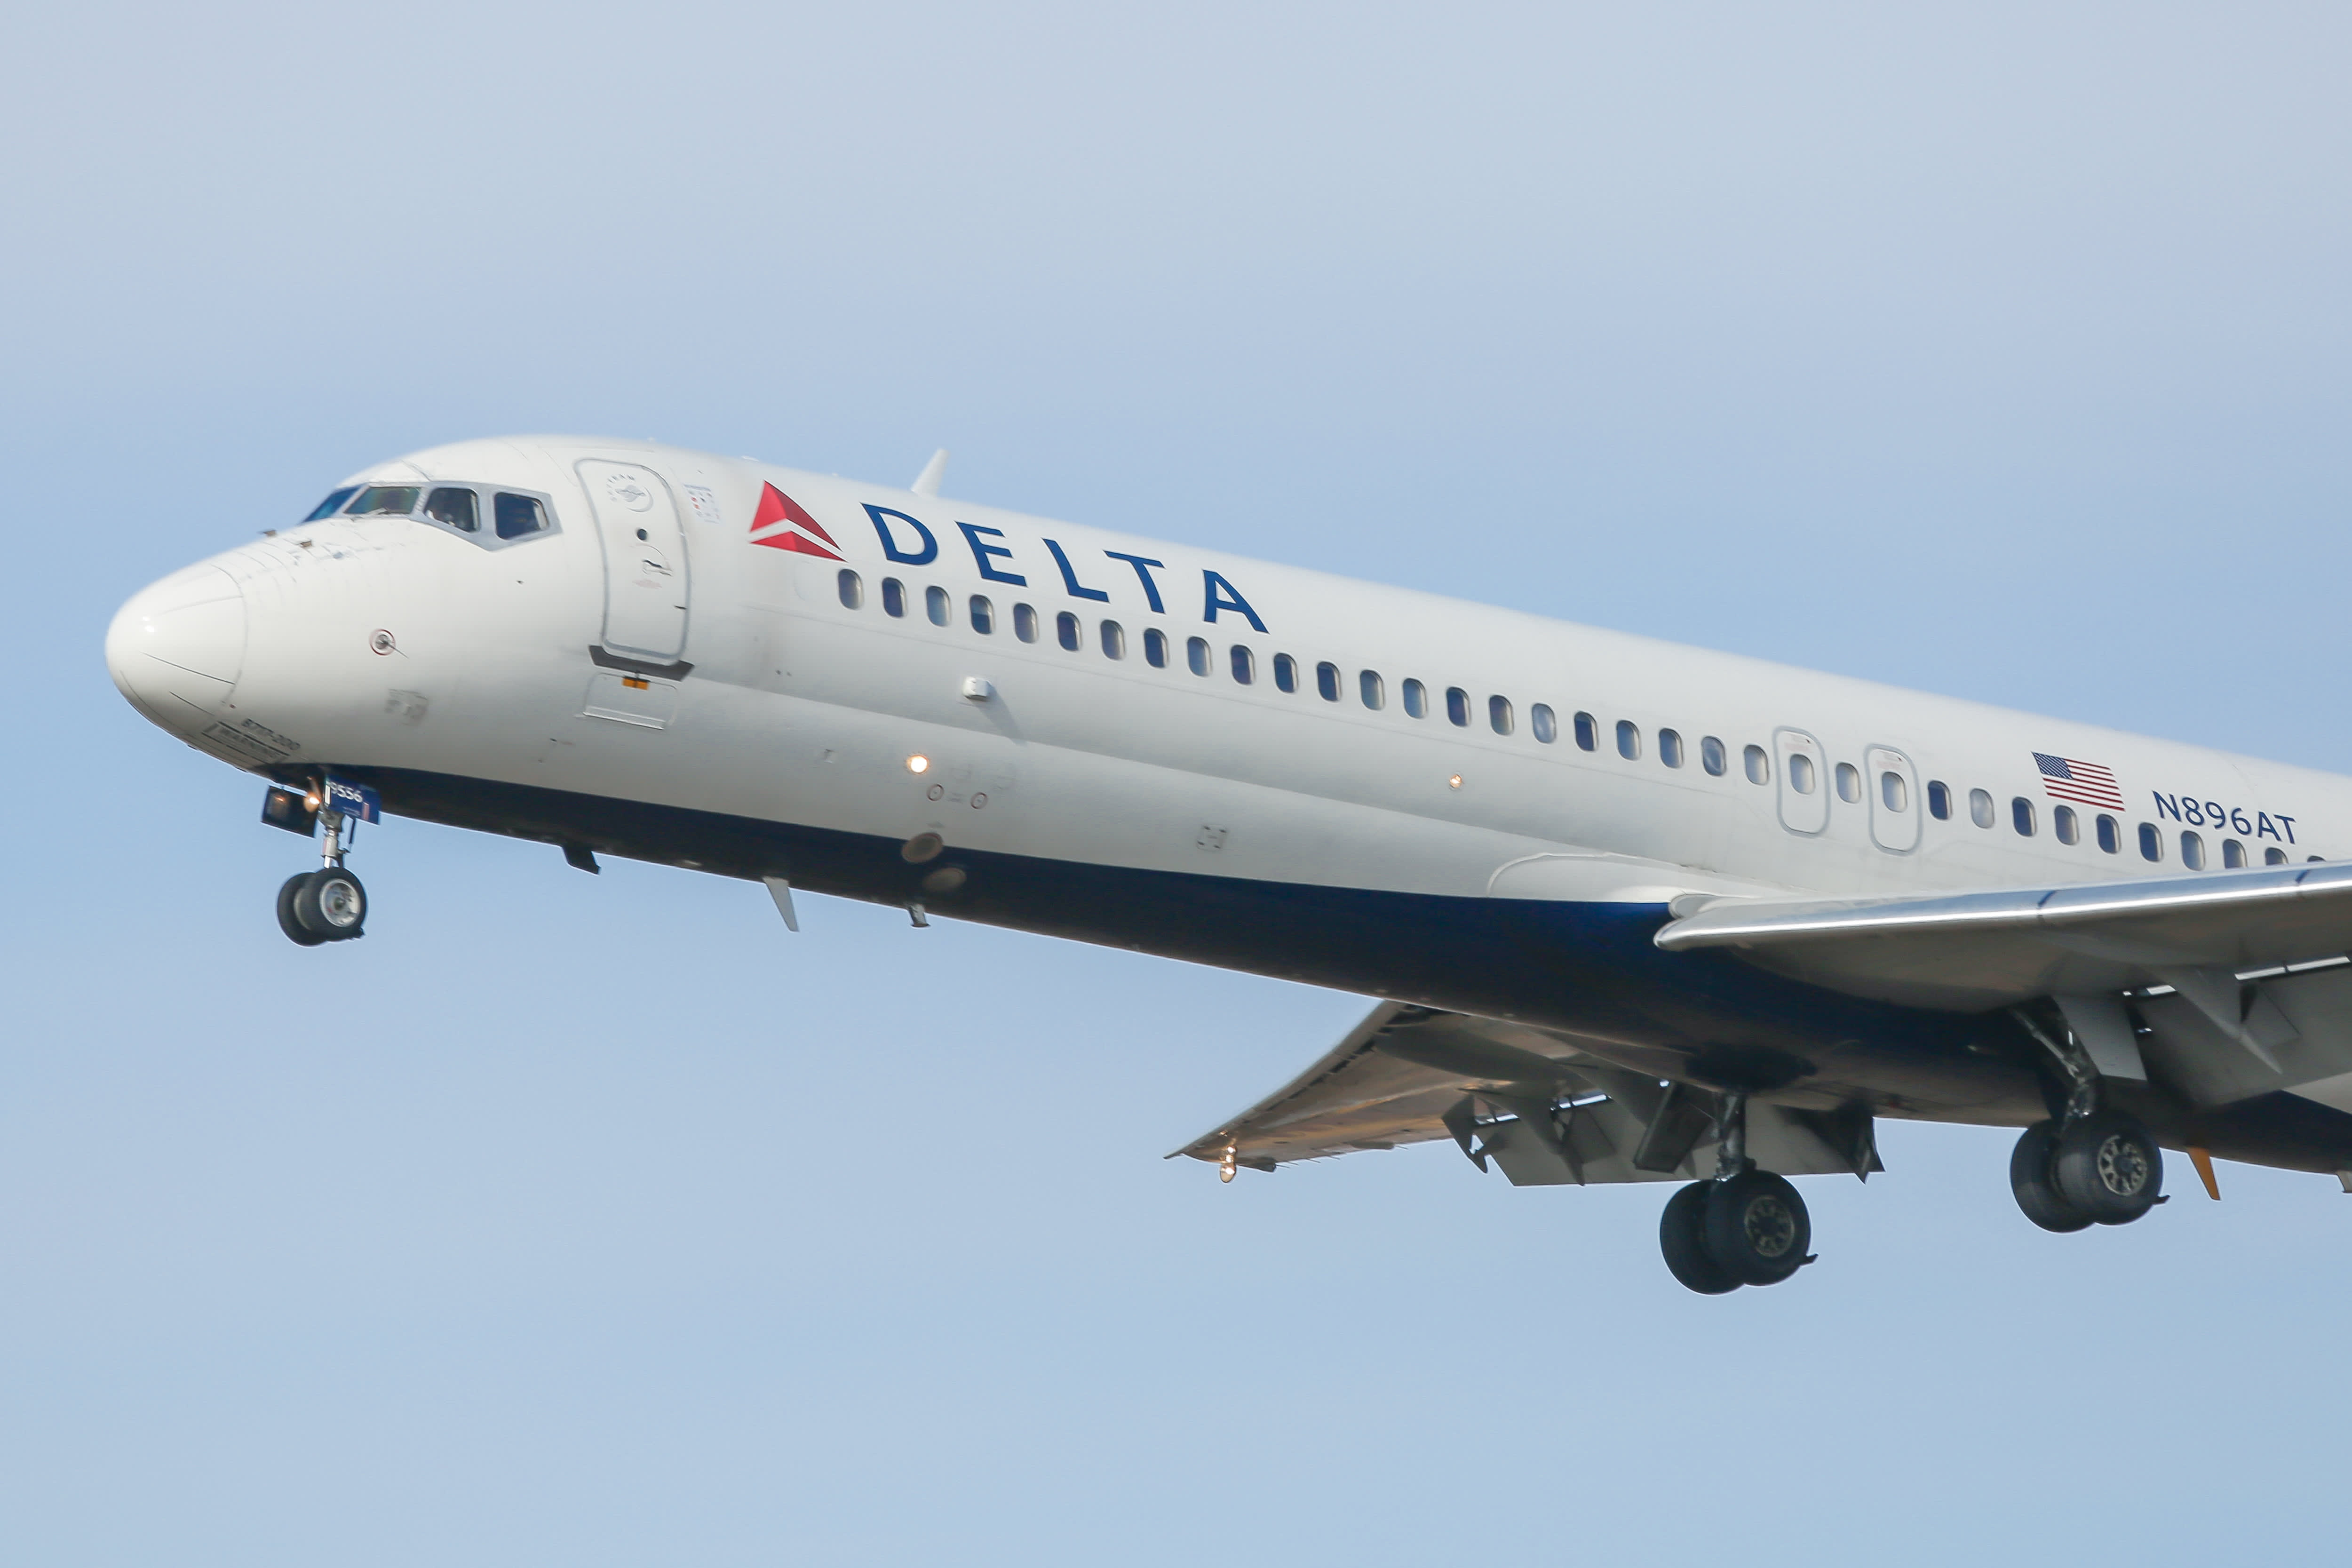 Delta CEO says carrier went ‘too far’ with SkyMiles changes, promises adjustments after frequent flyer backlash